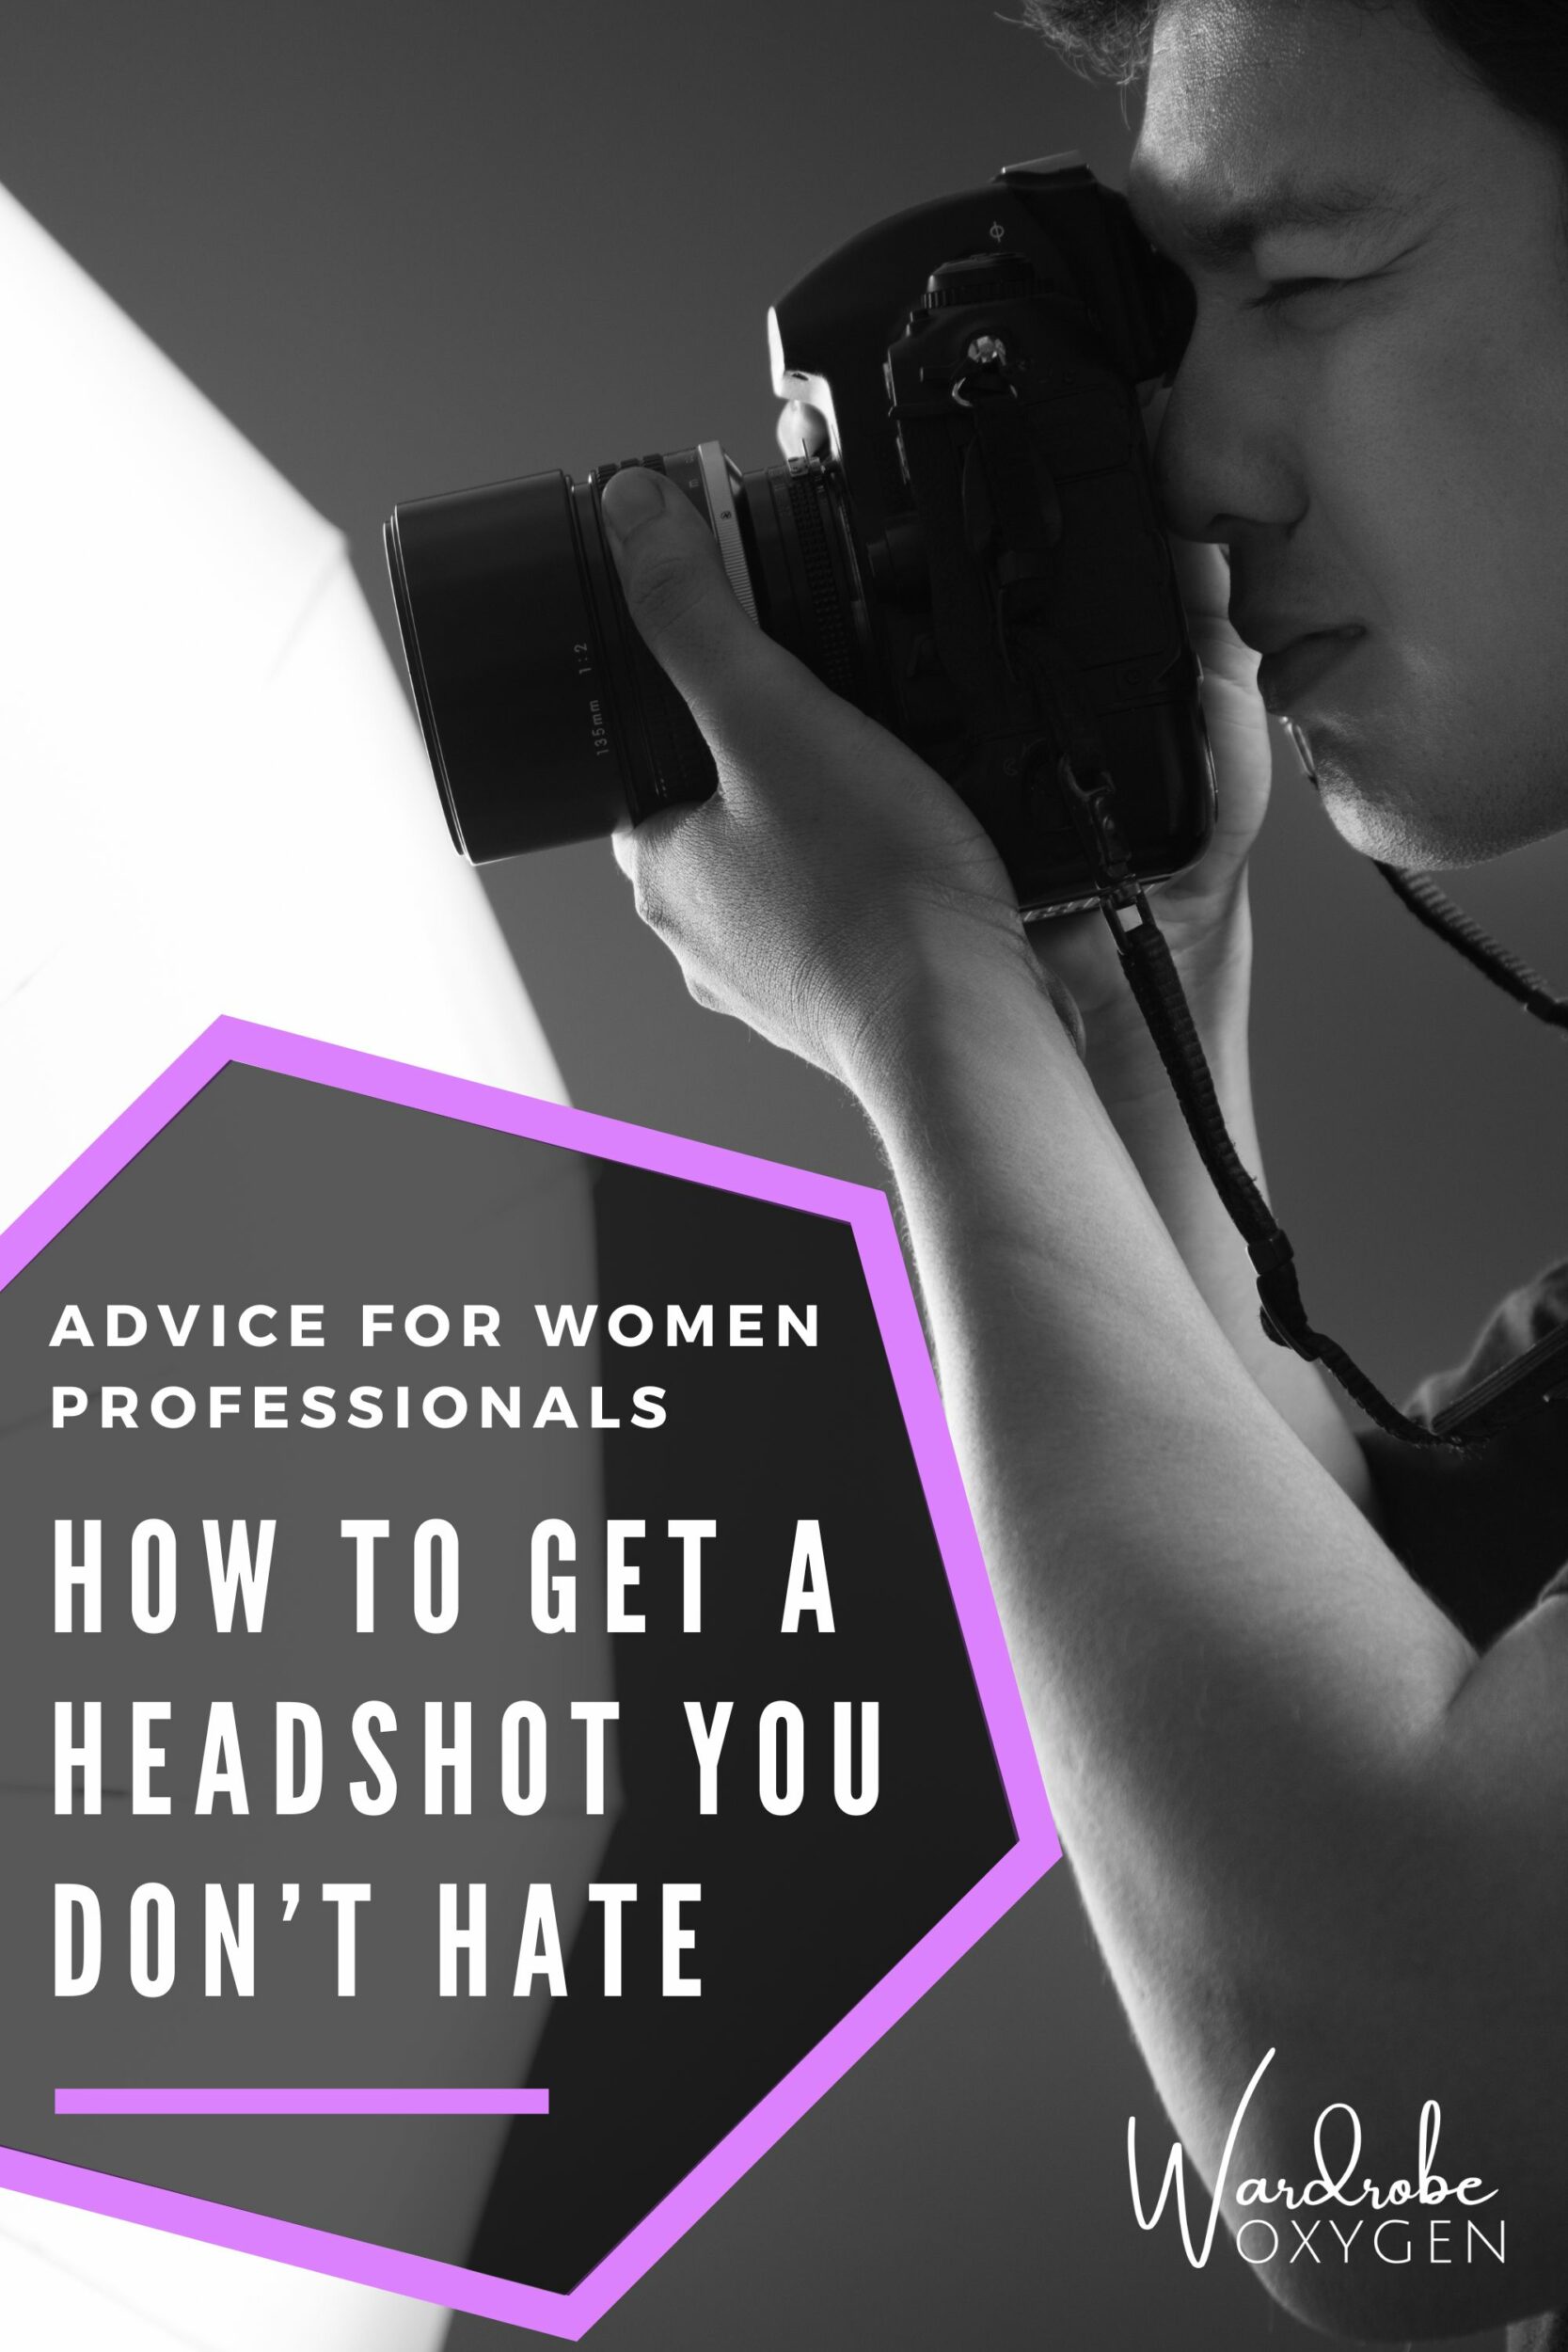 How to Get a Headshot You Don’t Hate